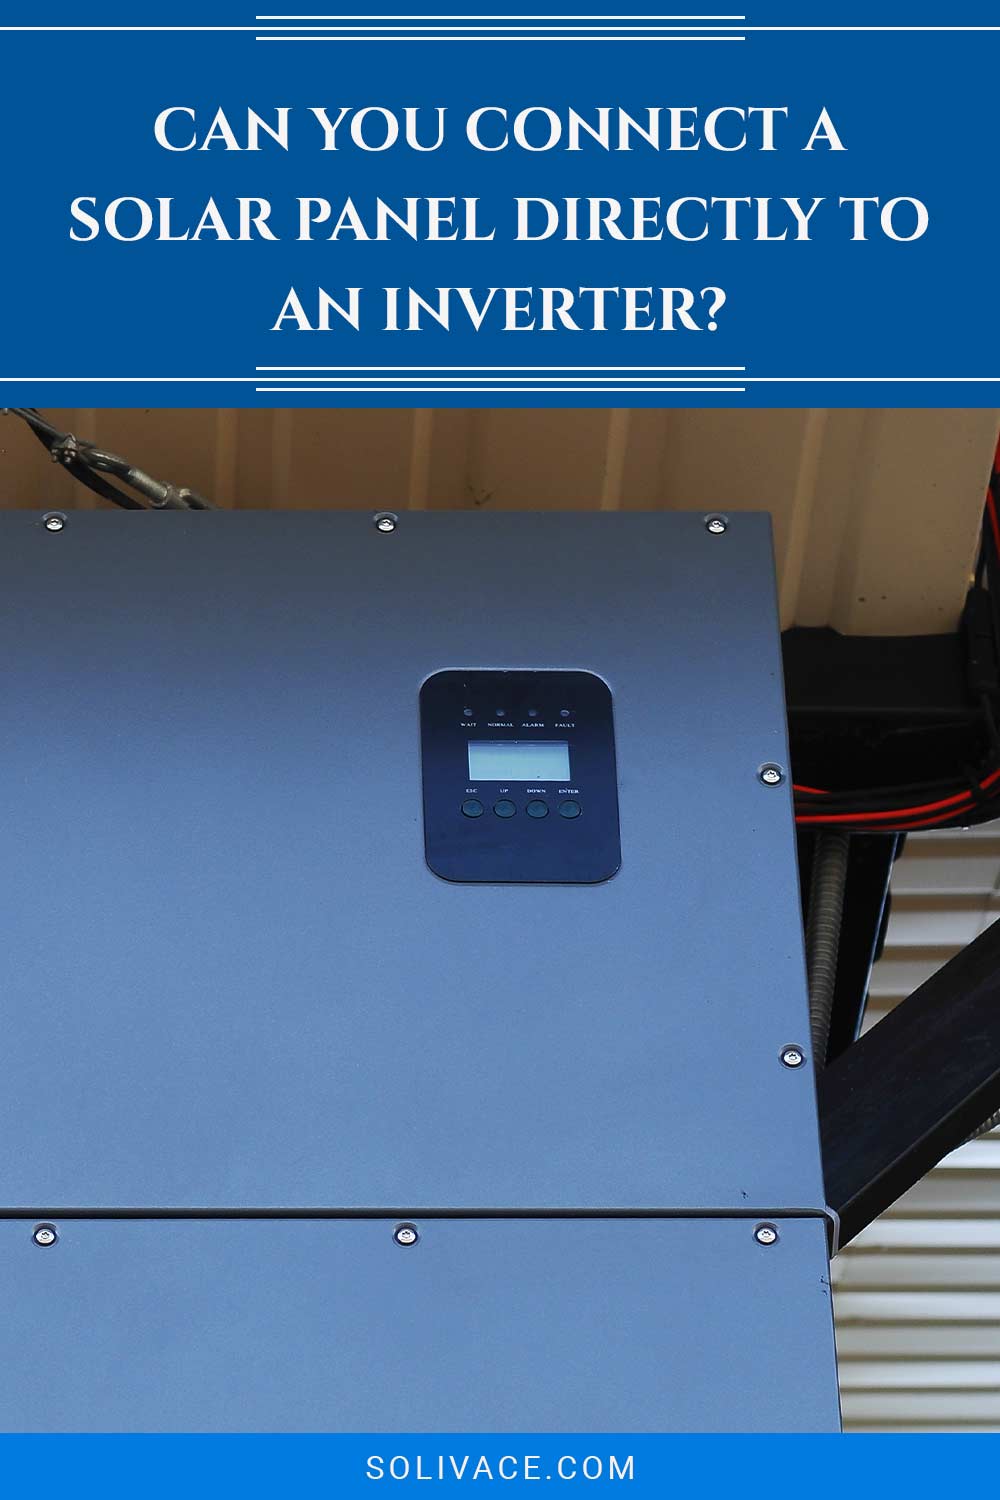 Can You Connect A Solar Panel Directly To An Inverter?